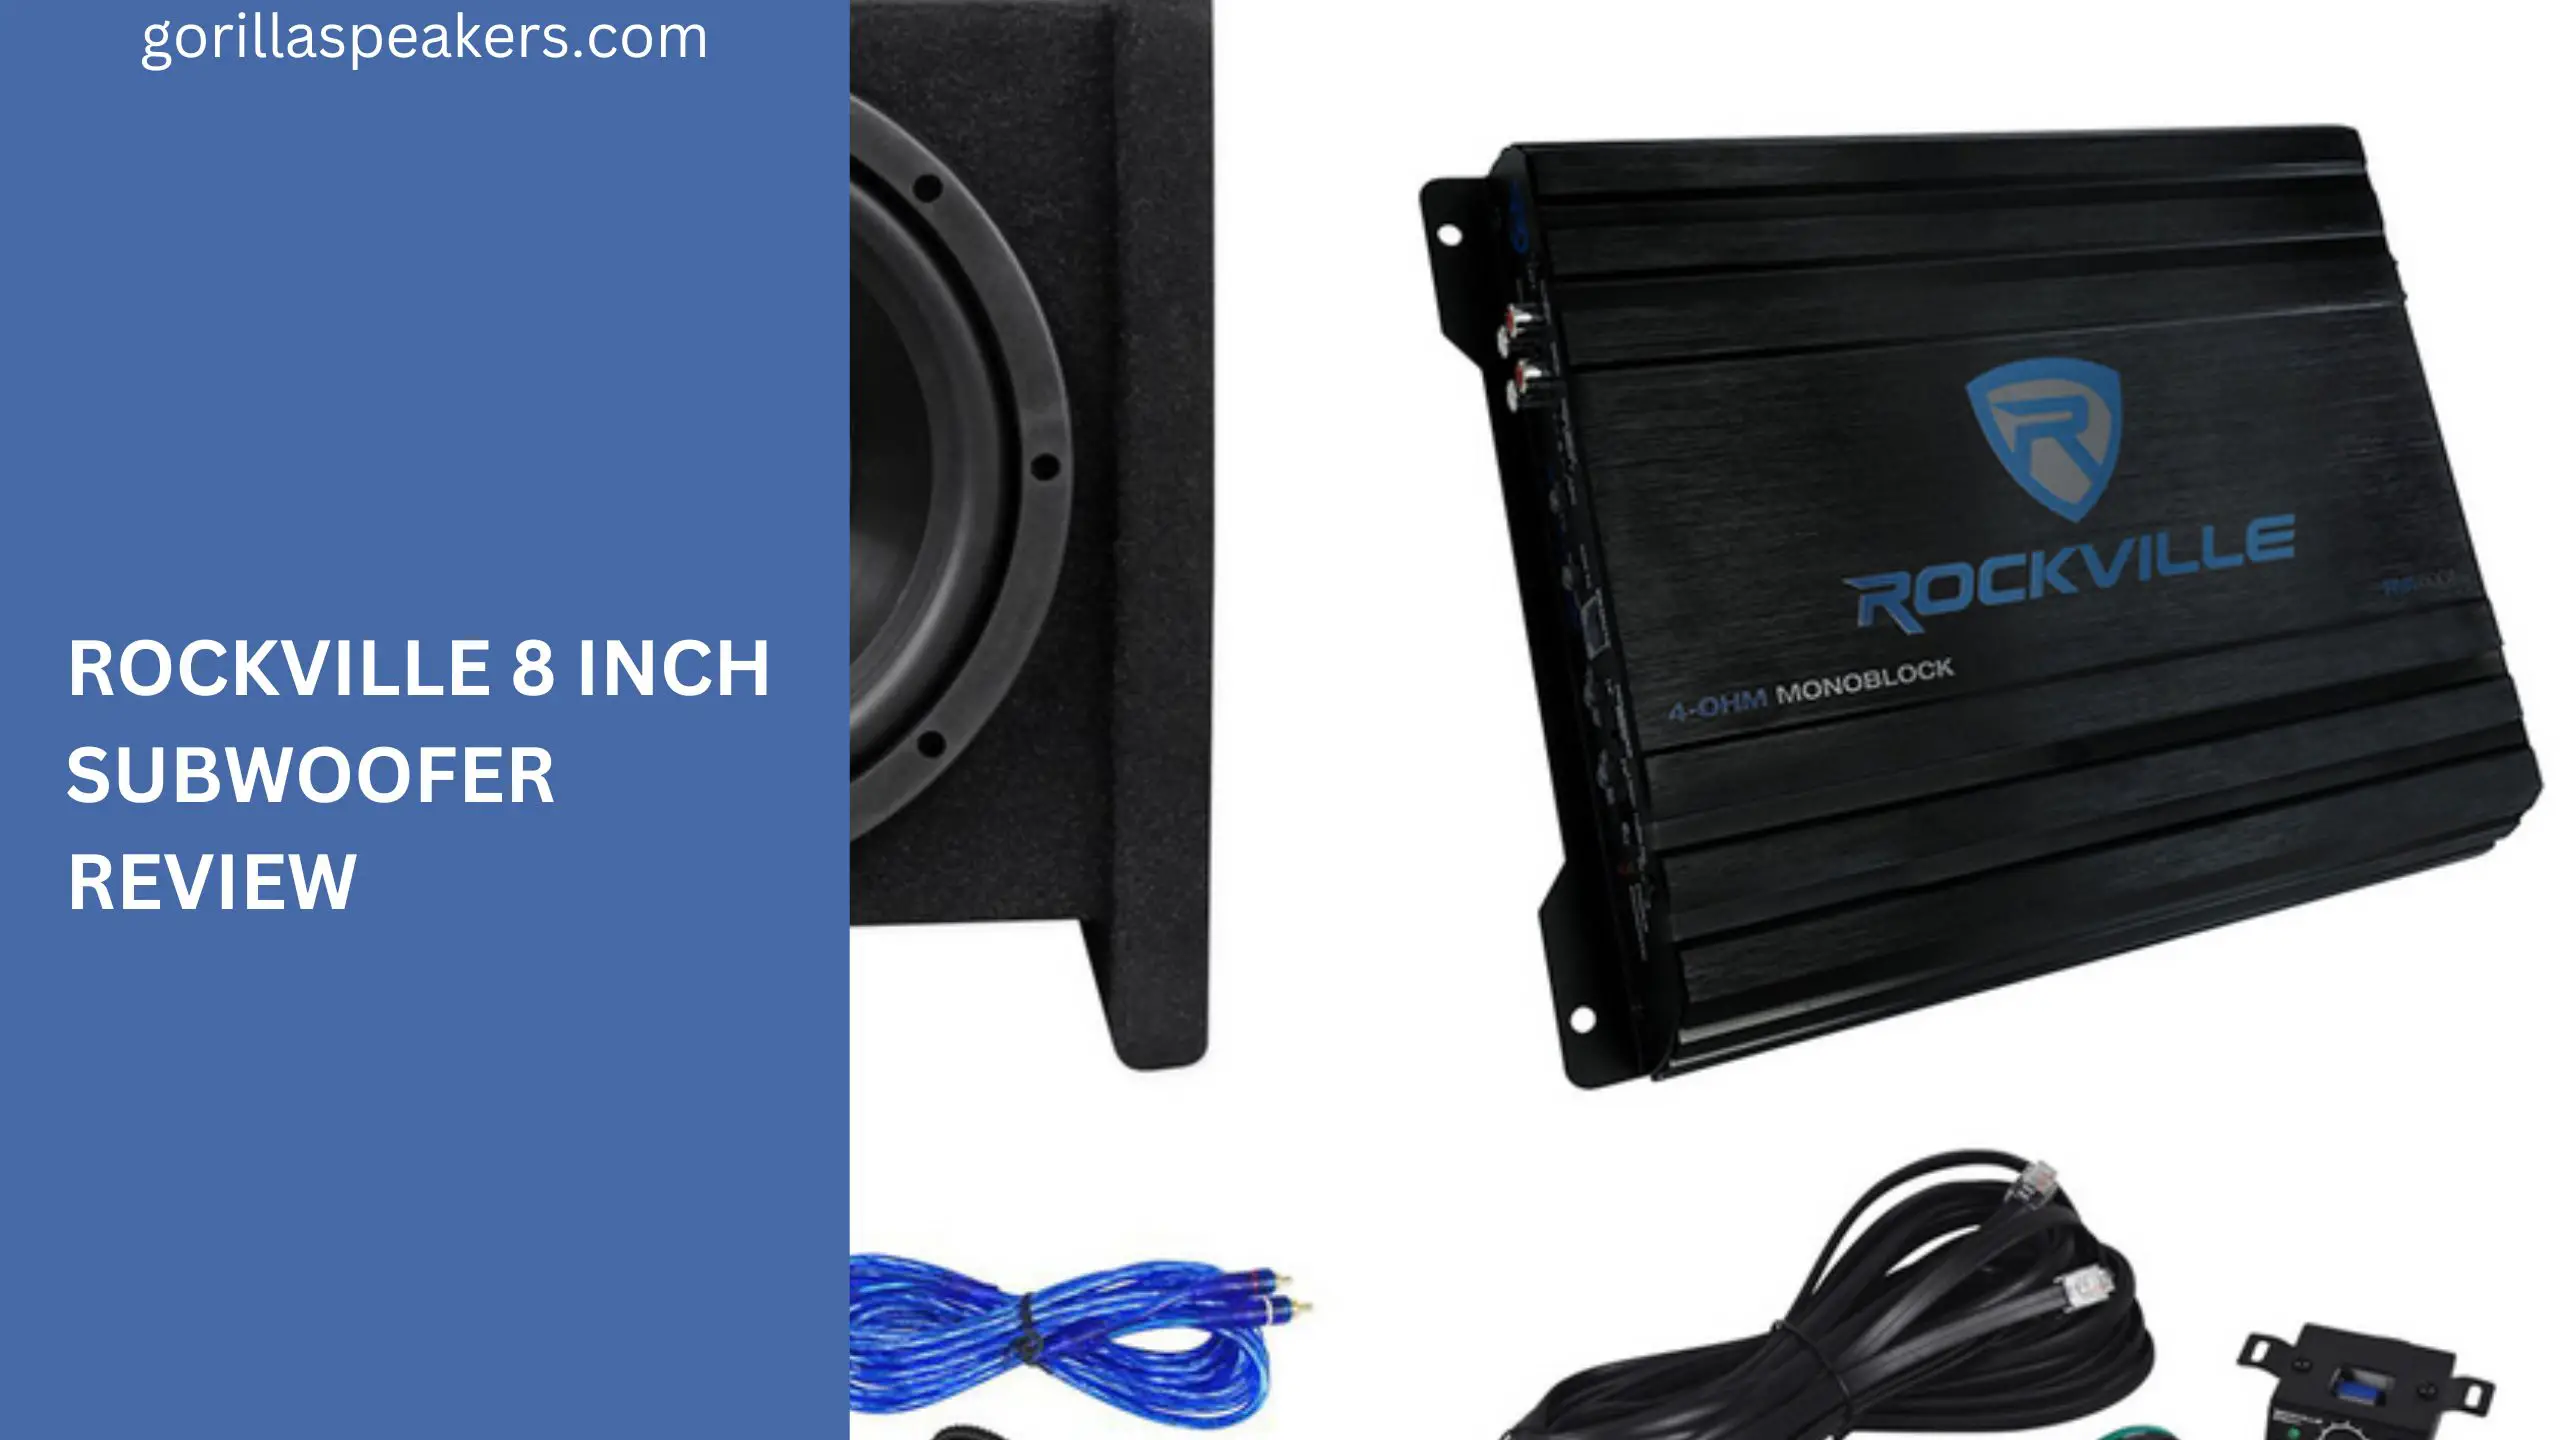 ROCKVILLE 8 INCH SUBWOOFER REVIEW